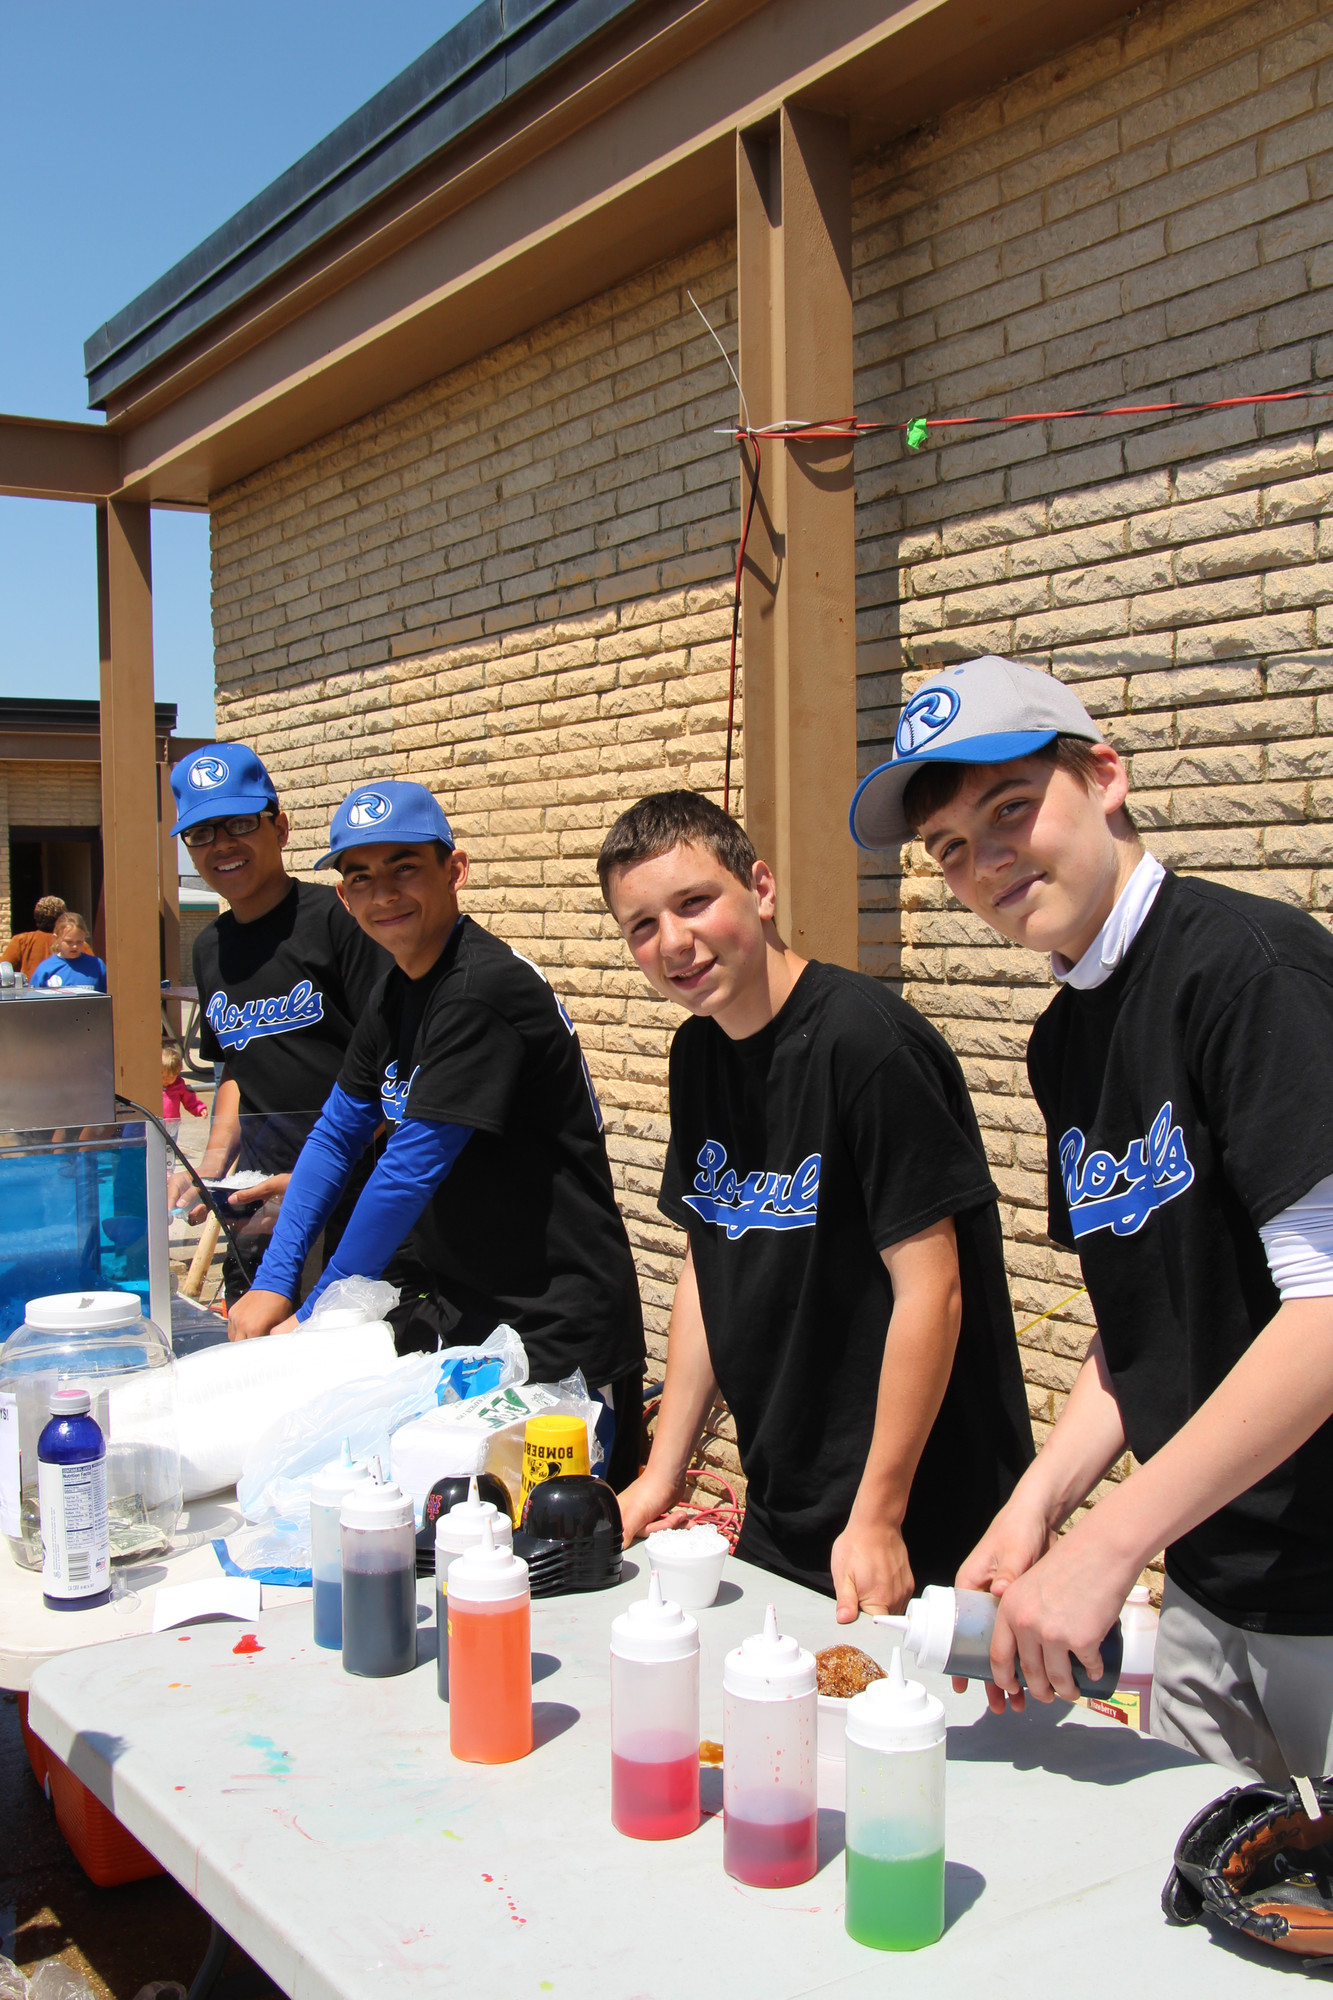 The Royals helped out with some refreshments.From left are Lino Peralta, 15,  Walter Argueta, 14, Christopher Moro, 14, and  Wally Melvin, 14.